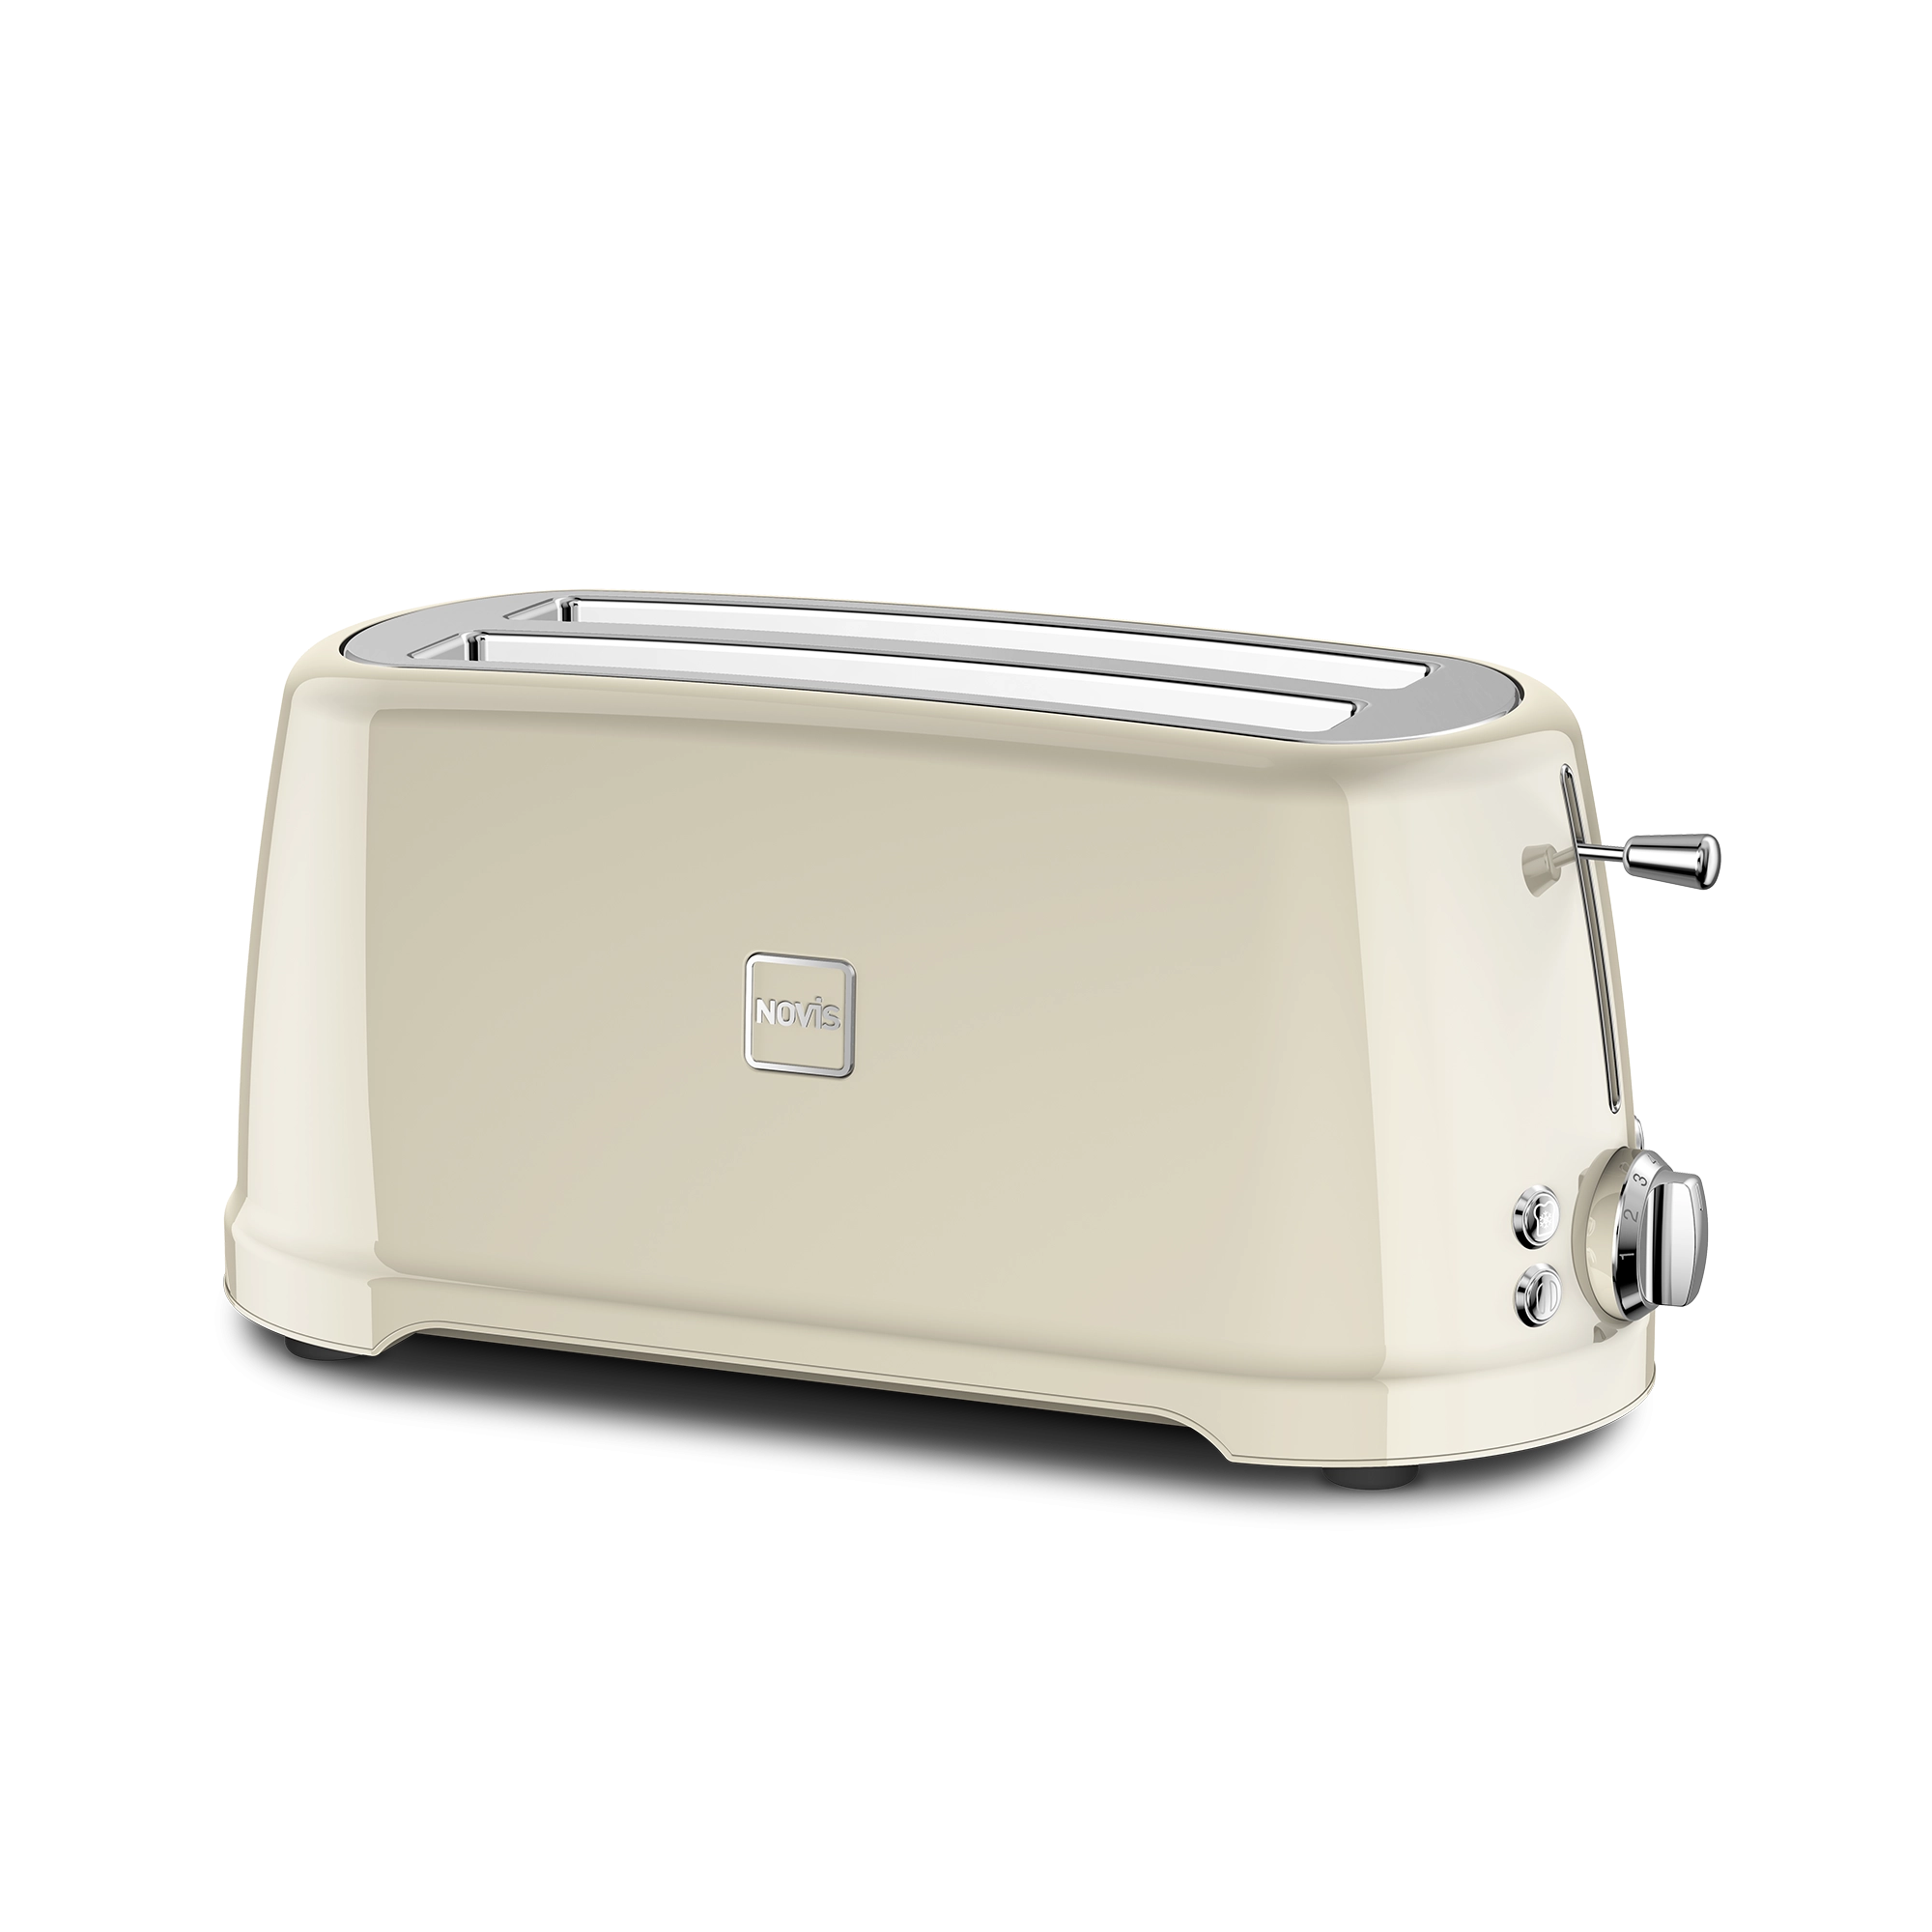 T4 cr Toaster